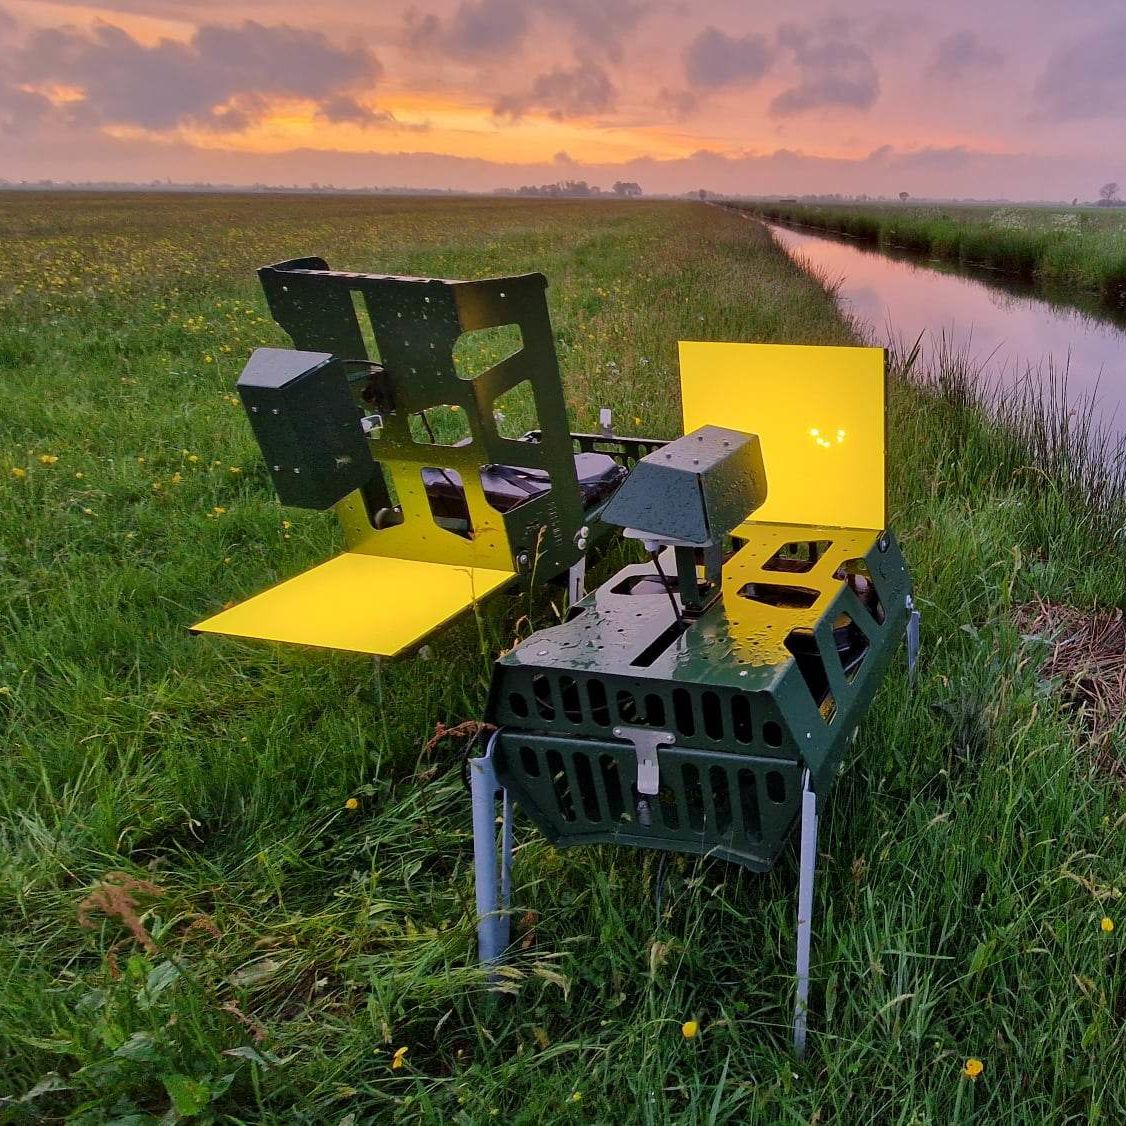 DIOPSIS insect camera in Dutch landscape